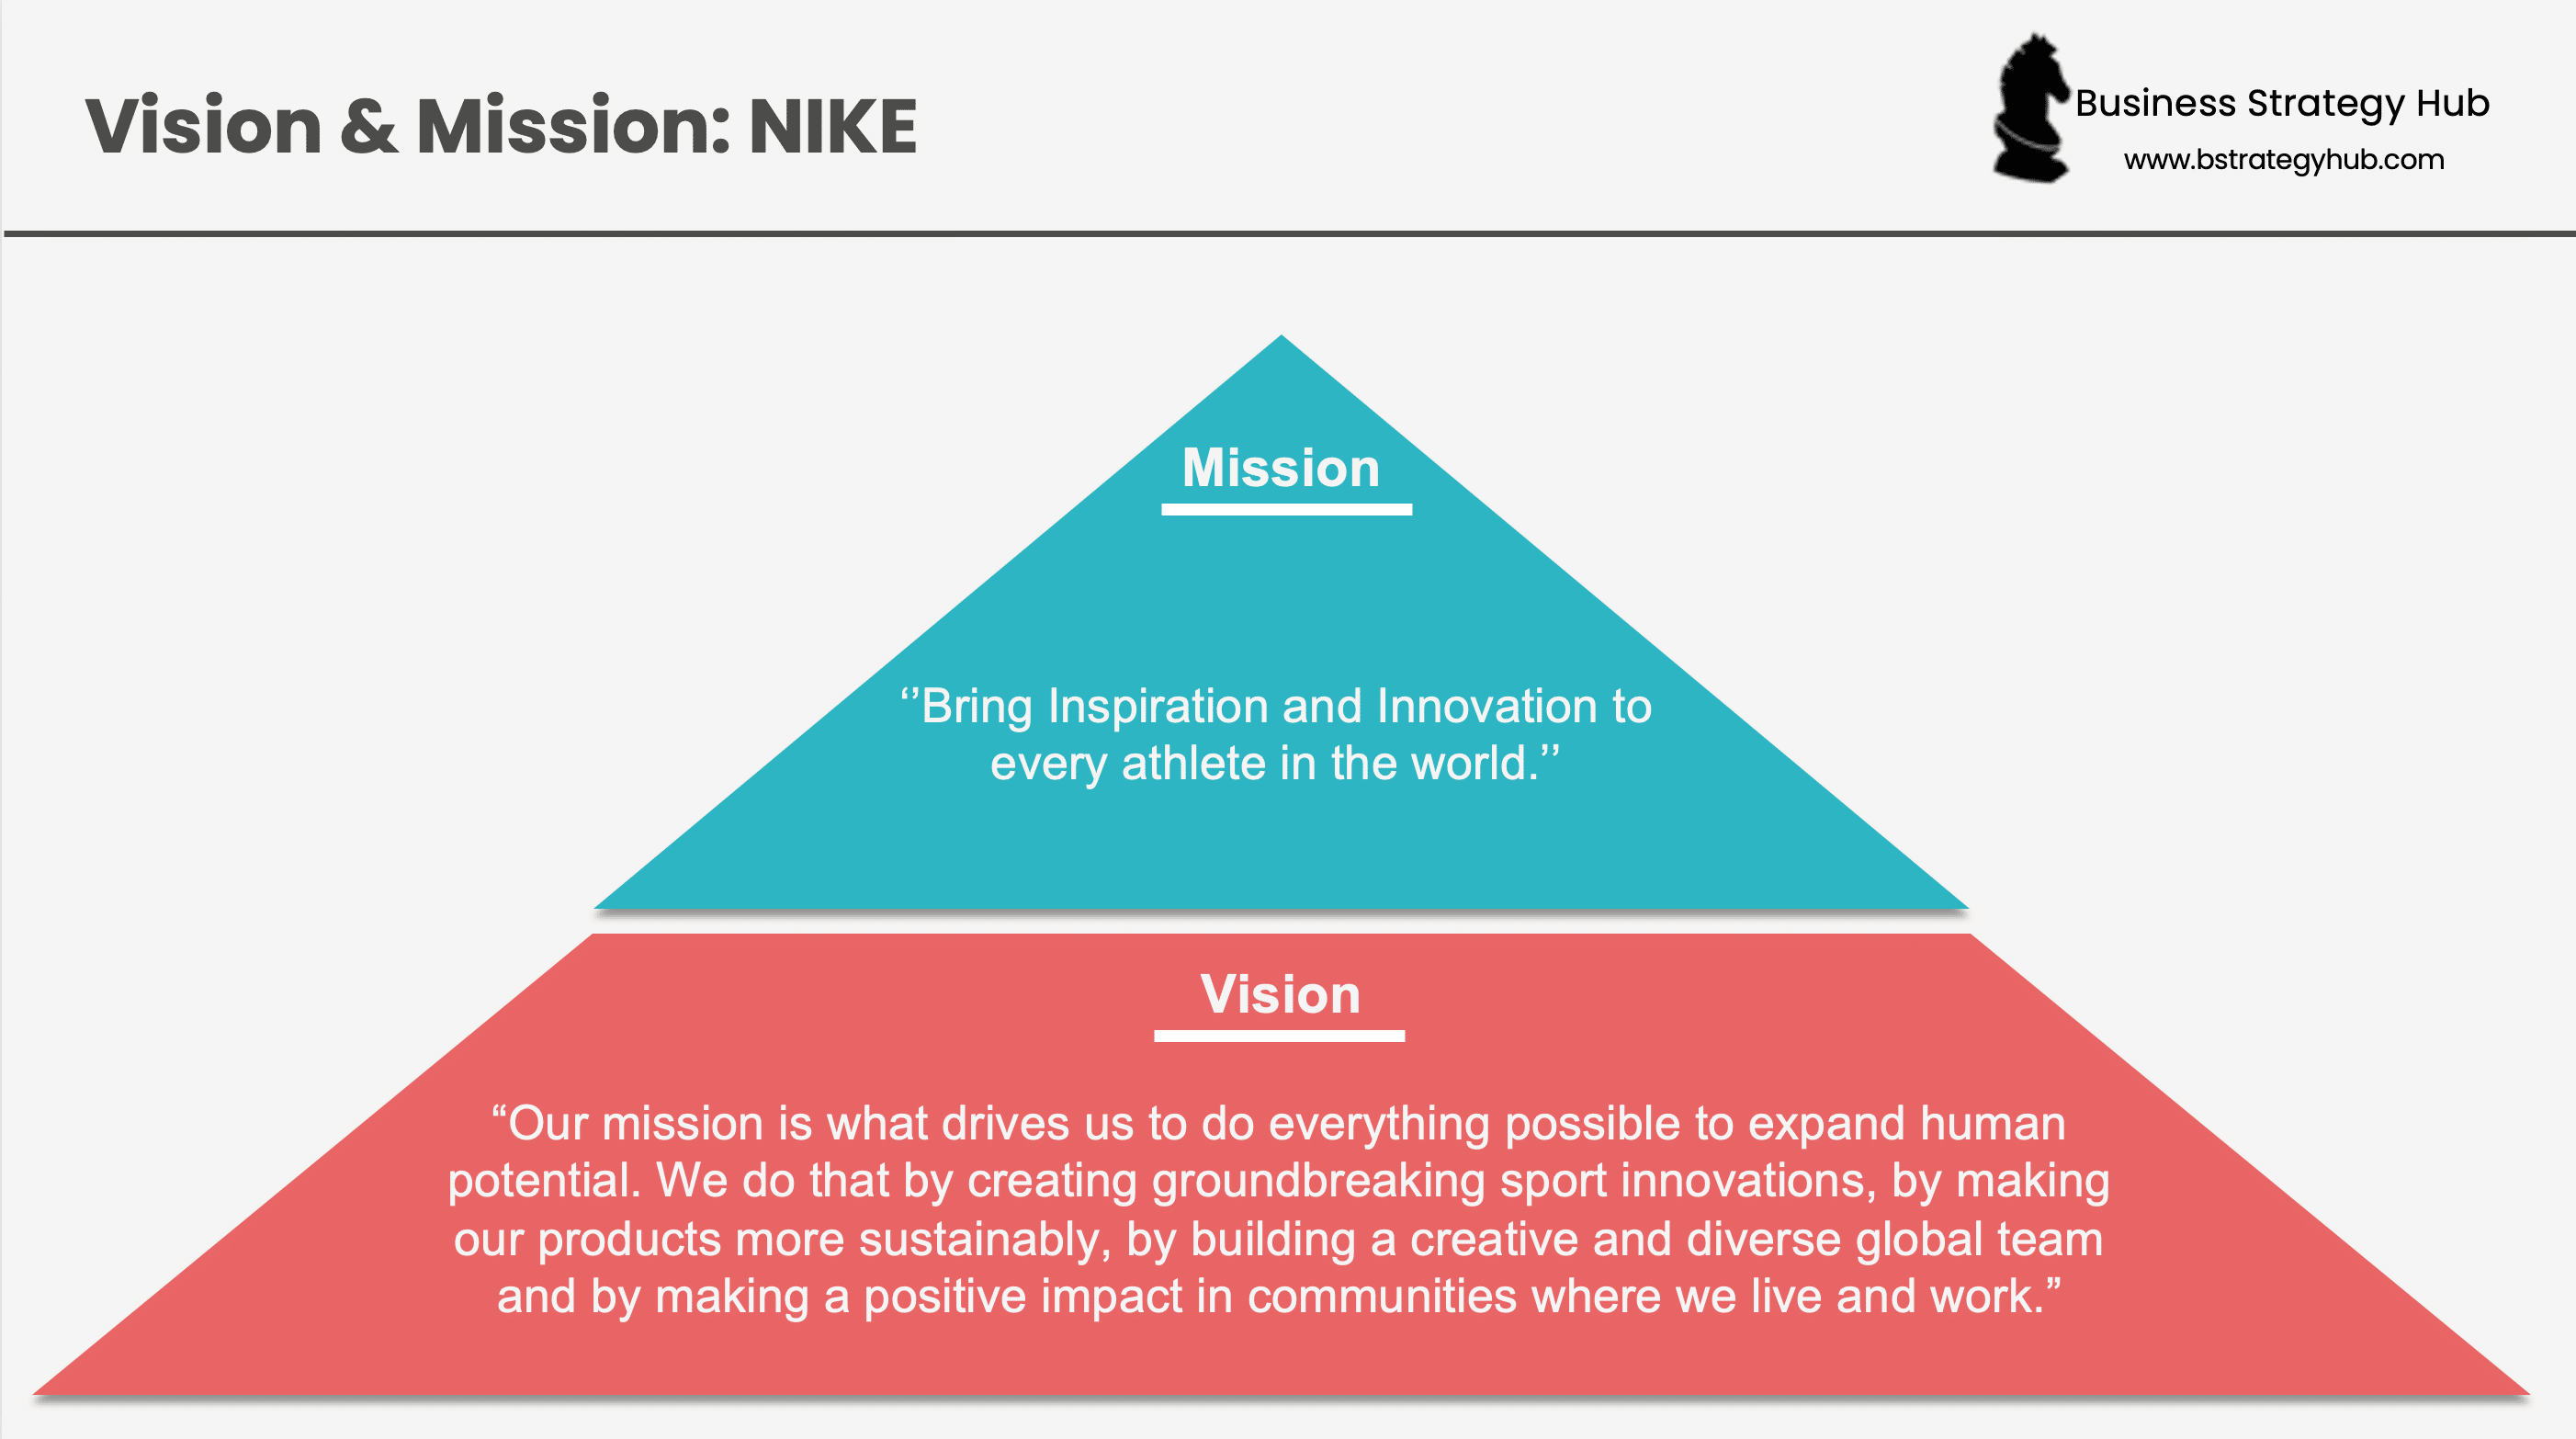 Officer wooden Toes Nike: Mission Statement | Vision | Purpose | Core Values (2022) | Business  Strategy Hub